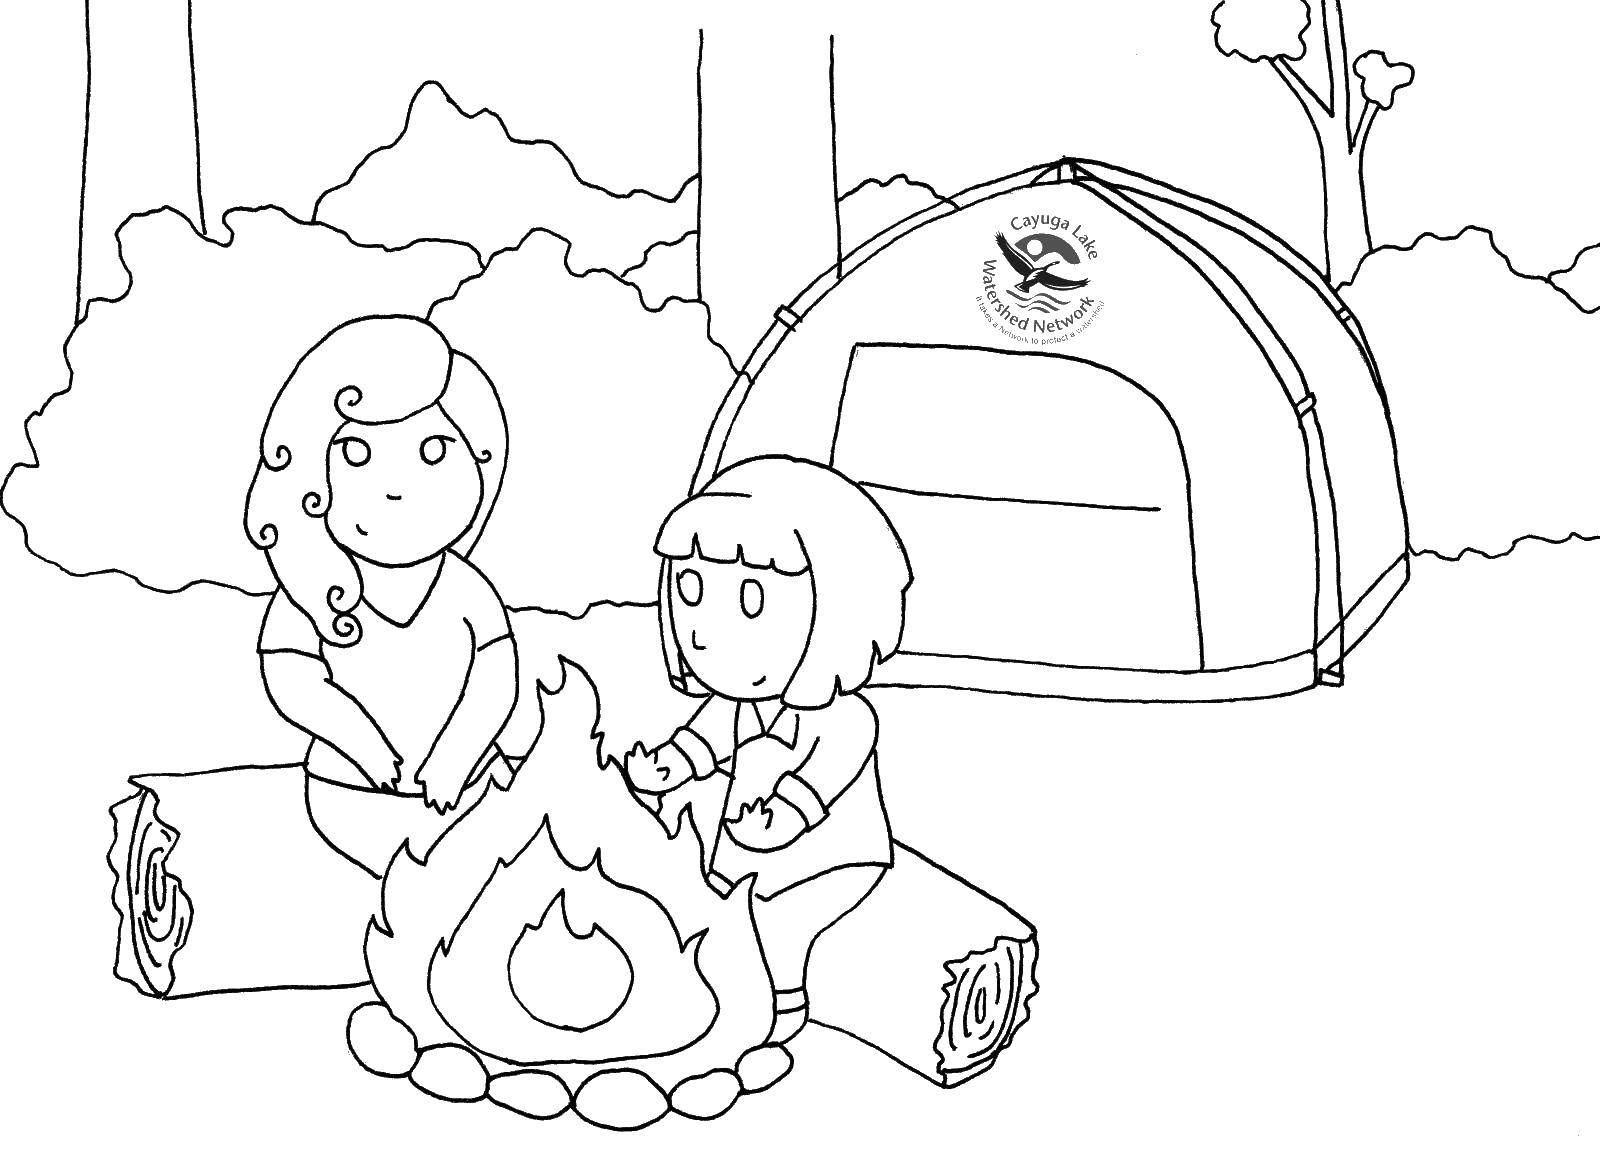 Coloring Mother and daughter at a fire. Category Camping. Tags:  mother, daughter, tent, campfire.